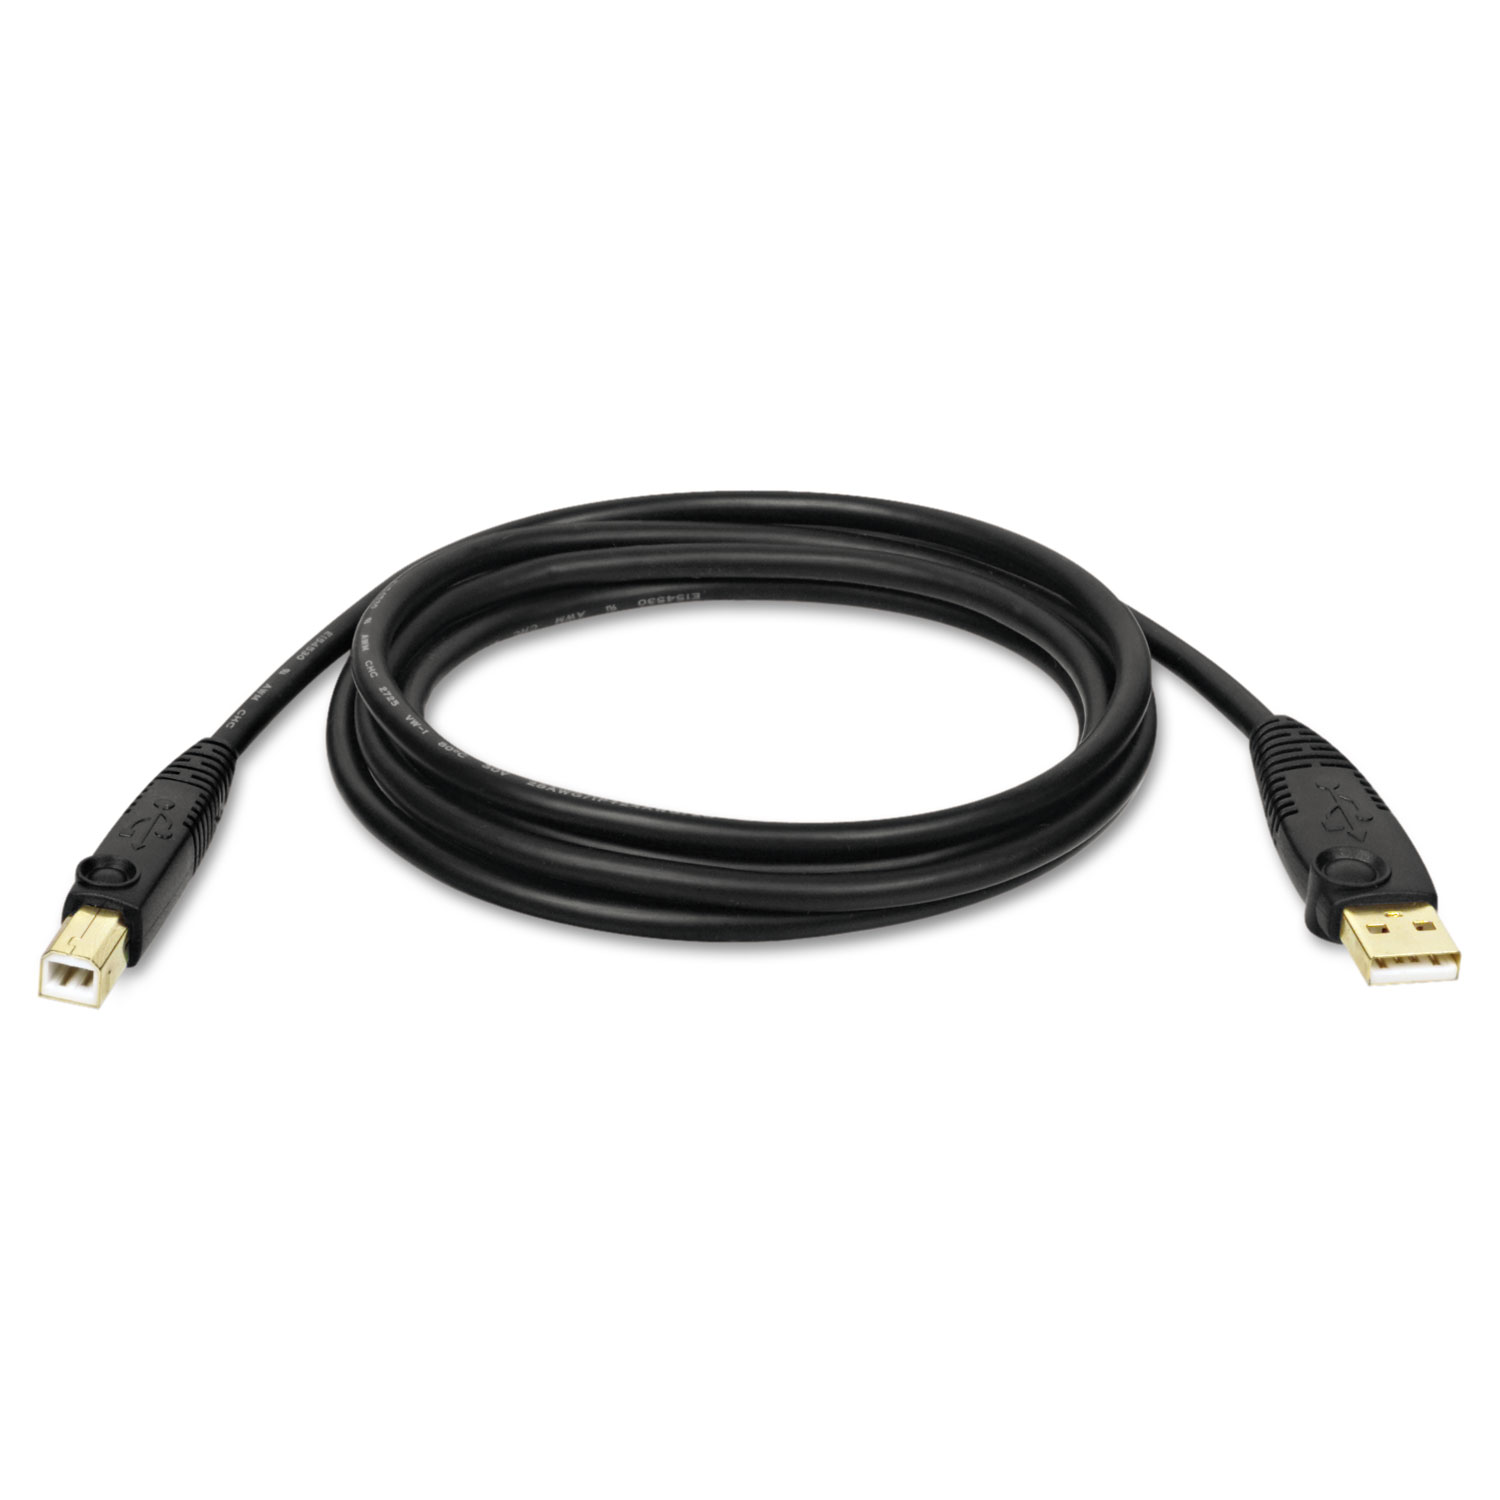 USB 2.0 Gold Cable, 15 ft, Black